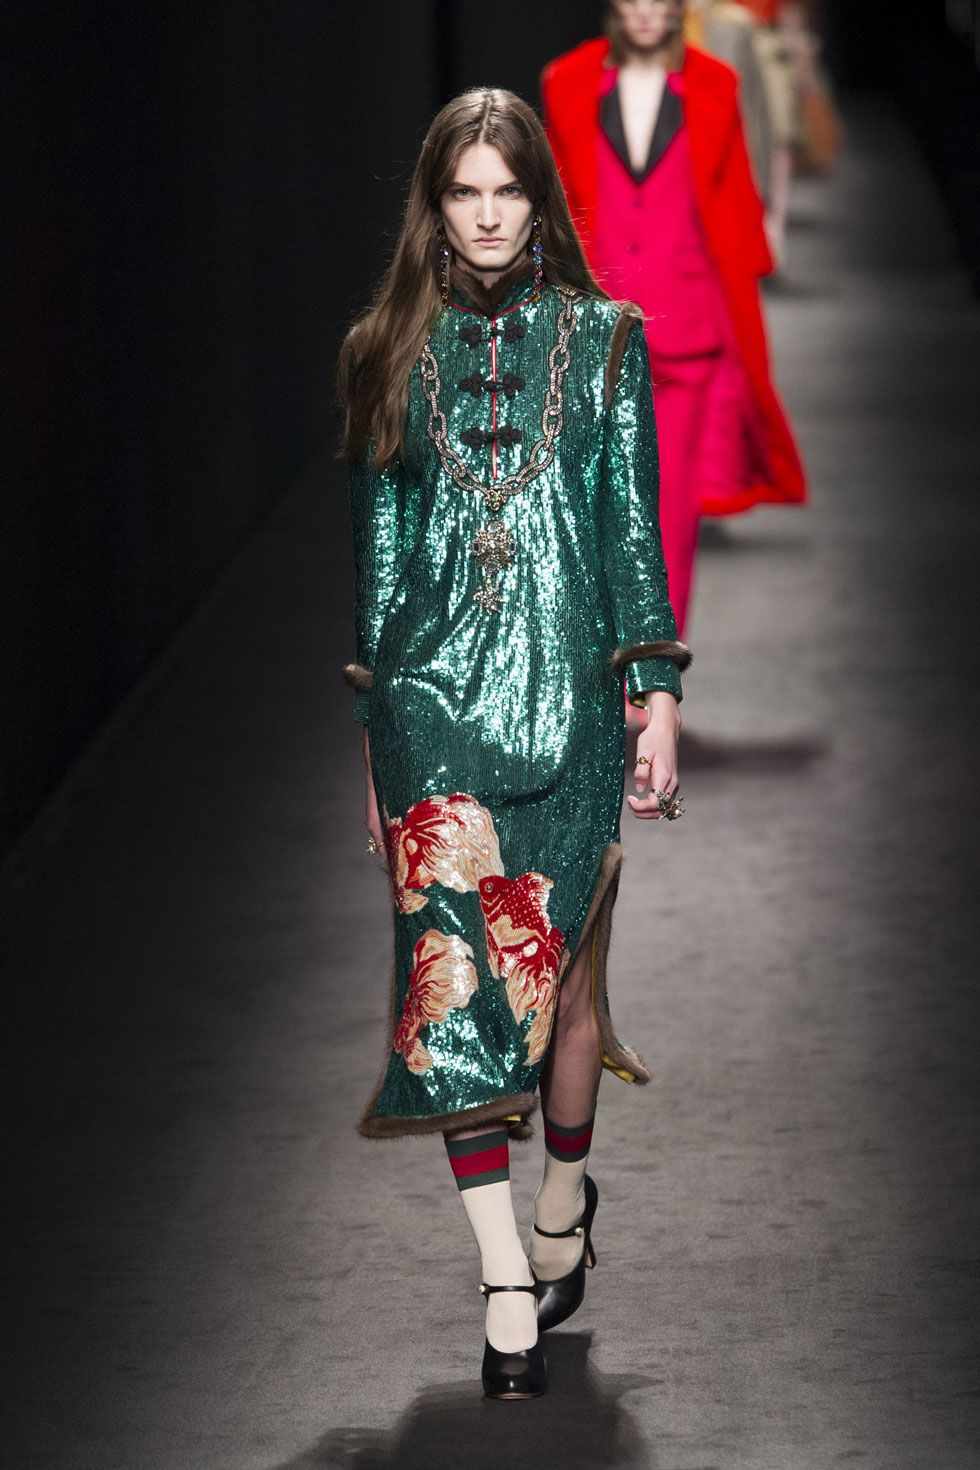 Gucci Fall 2016 Ready-to-Wear Show